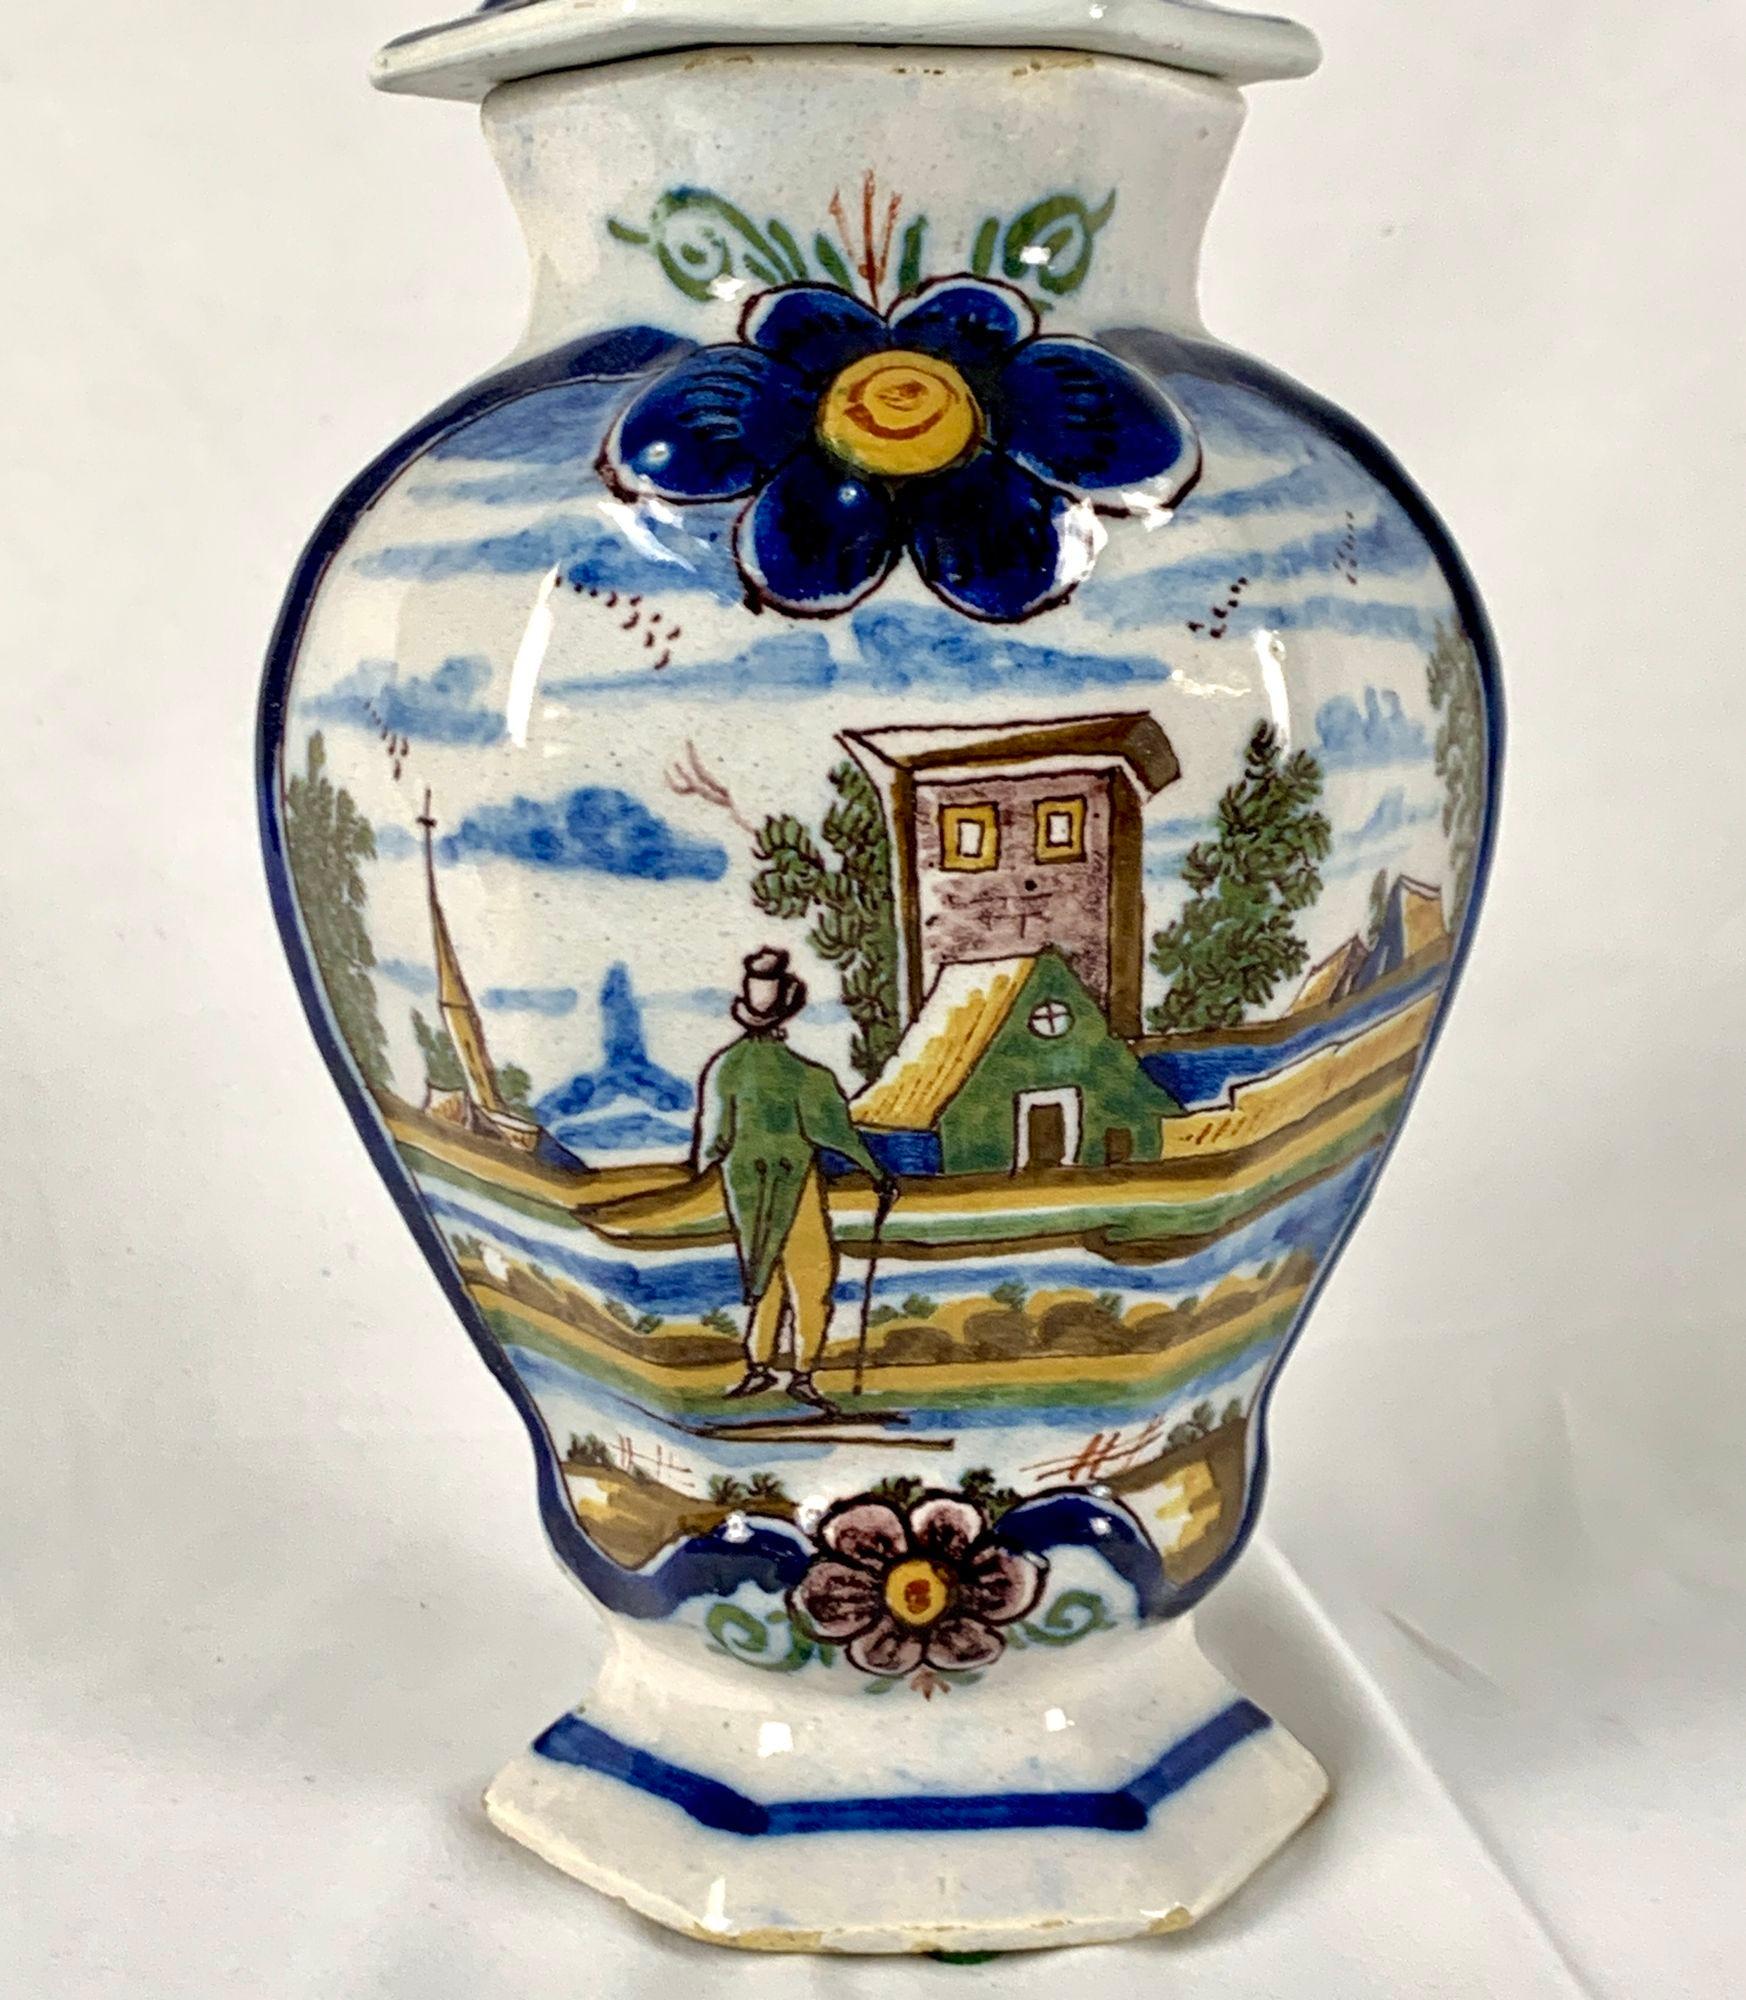 This lovely 18th century Delft jar was made in the factory of De Bloempot in Delft, The Netherlands, circa 1780.
The design features a gentleman with a top hat and a walking stick standing at the side of a river.
He looks across at the buildings of